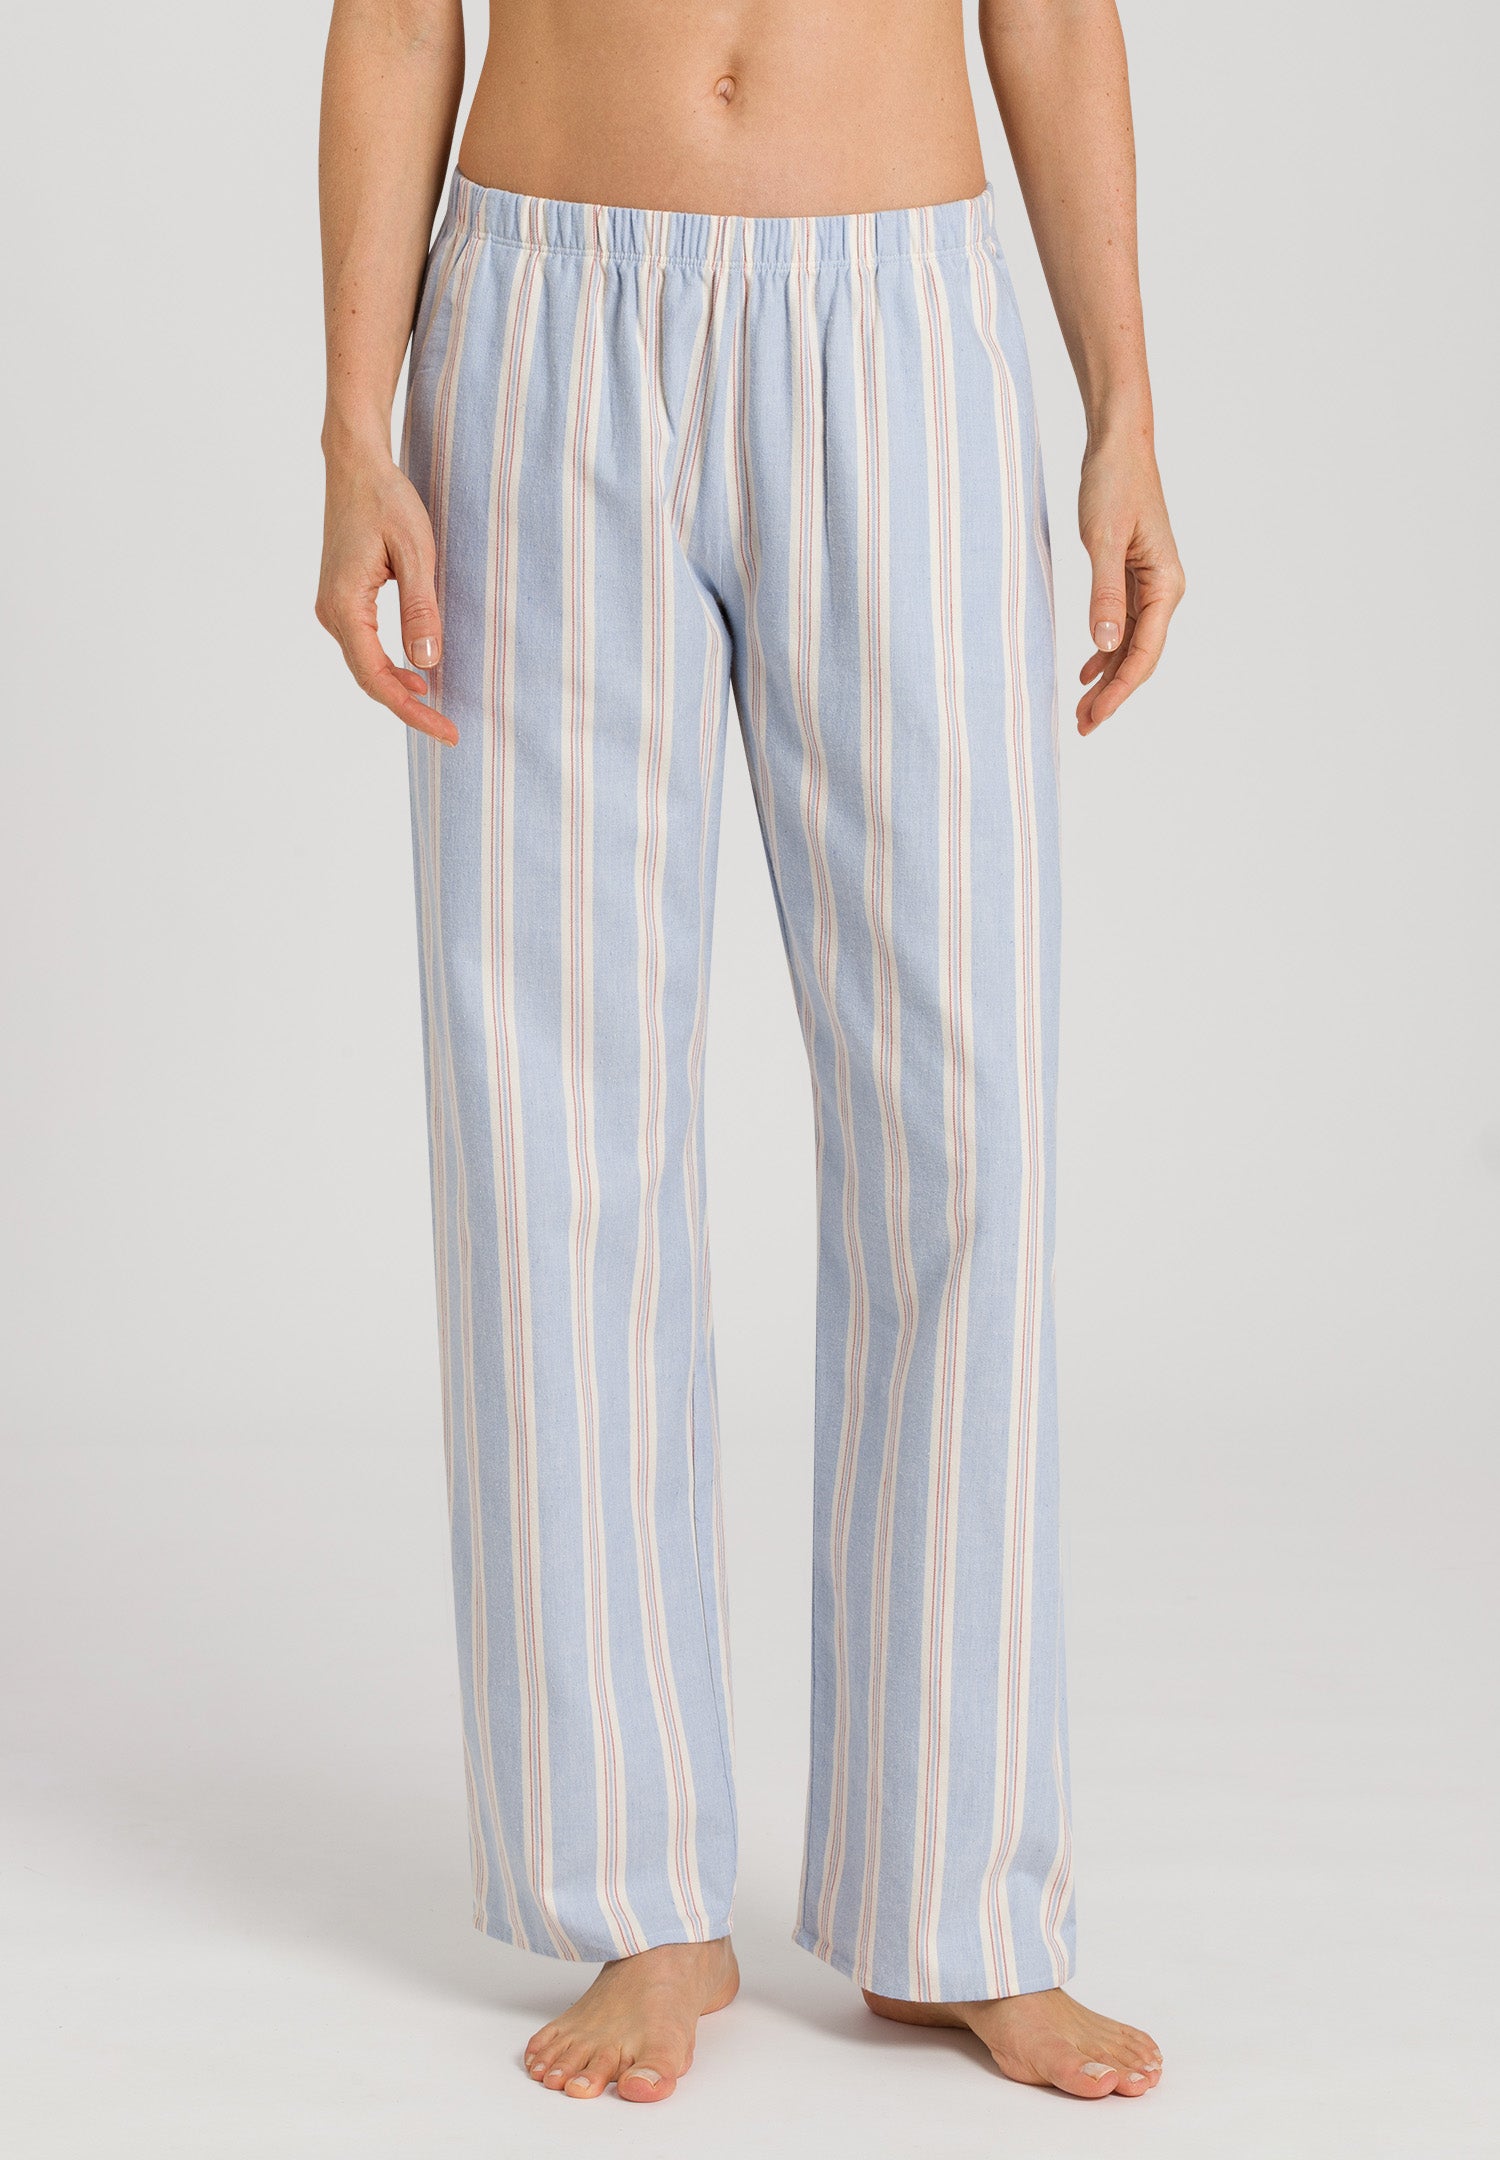 76486 Loungy Nights Flannel Pants - 2988 Soft Stripe